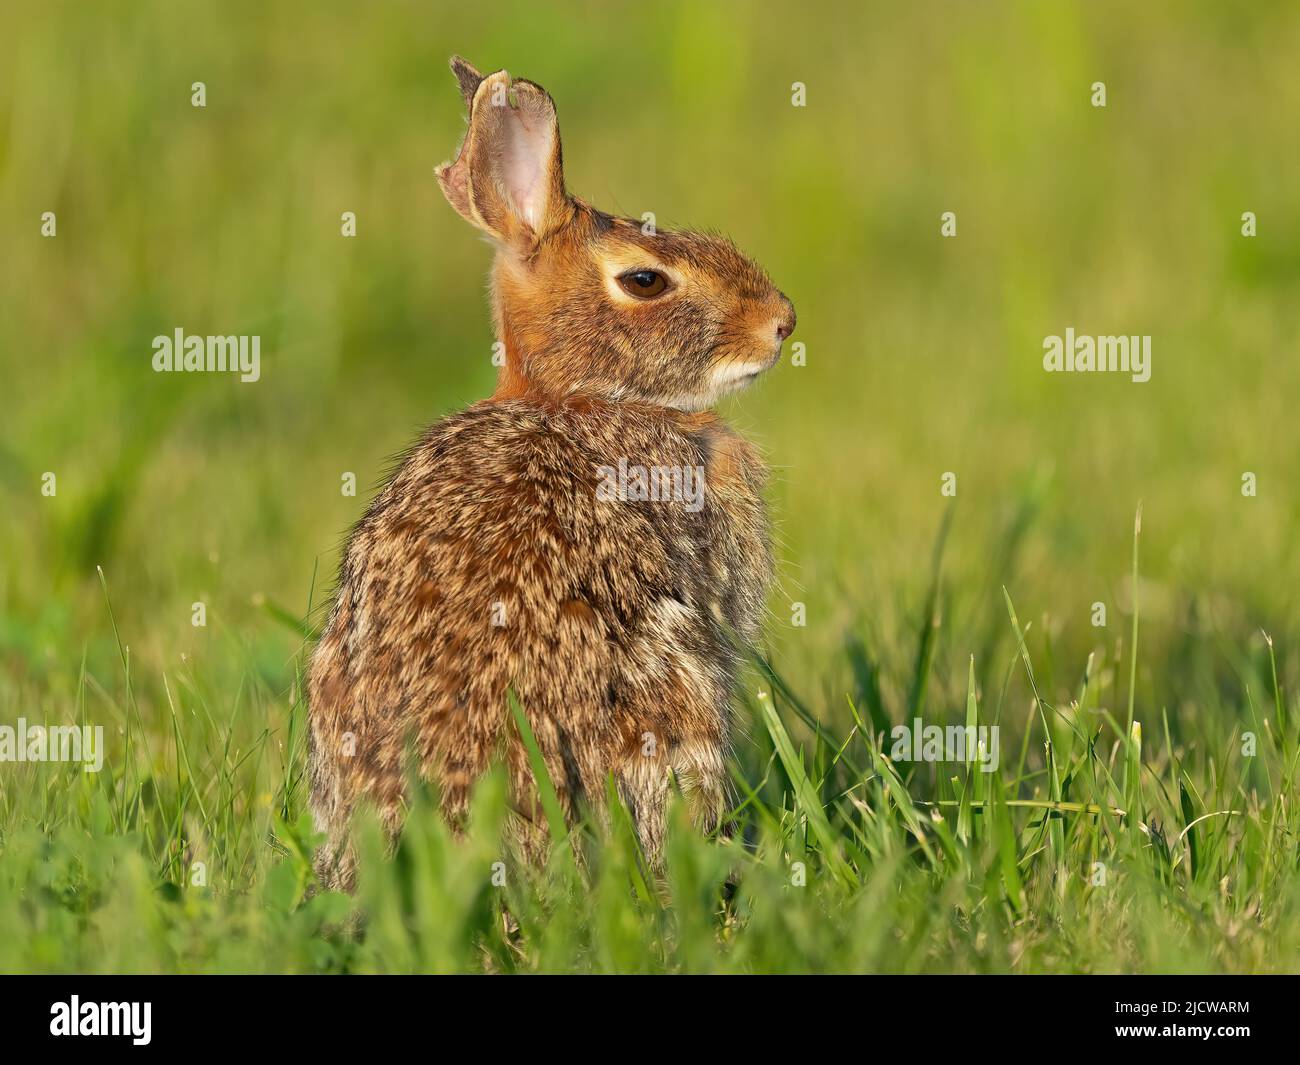 A Young Eastern Cottontail Rabbit Stock Photo